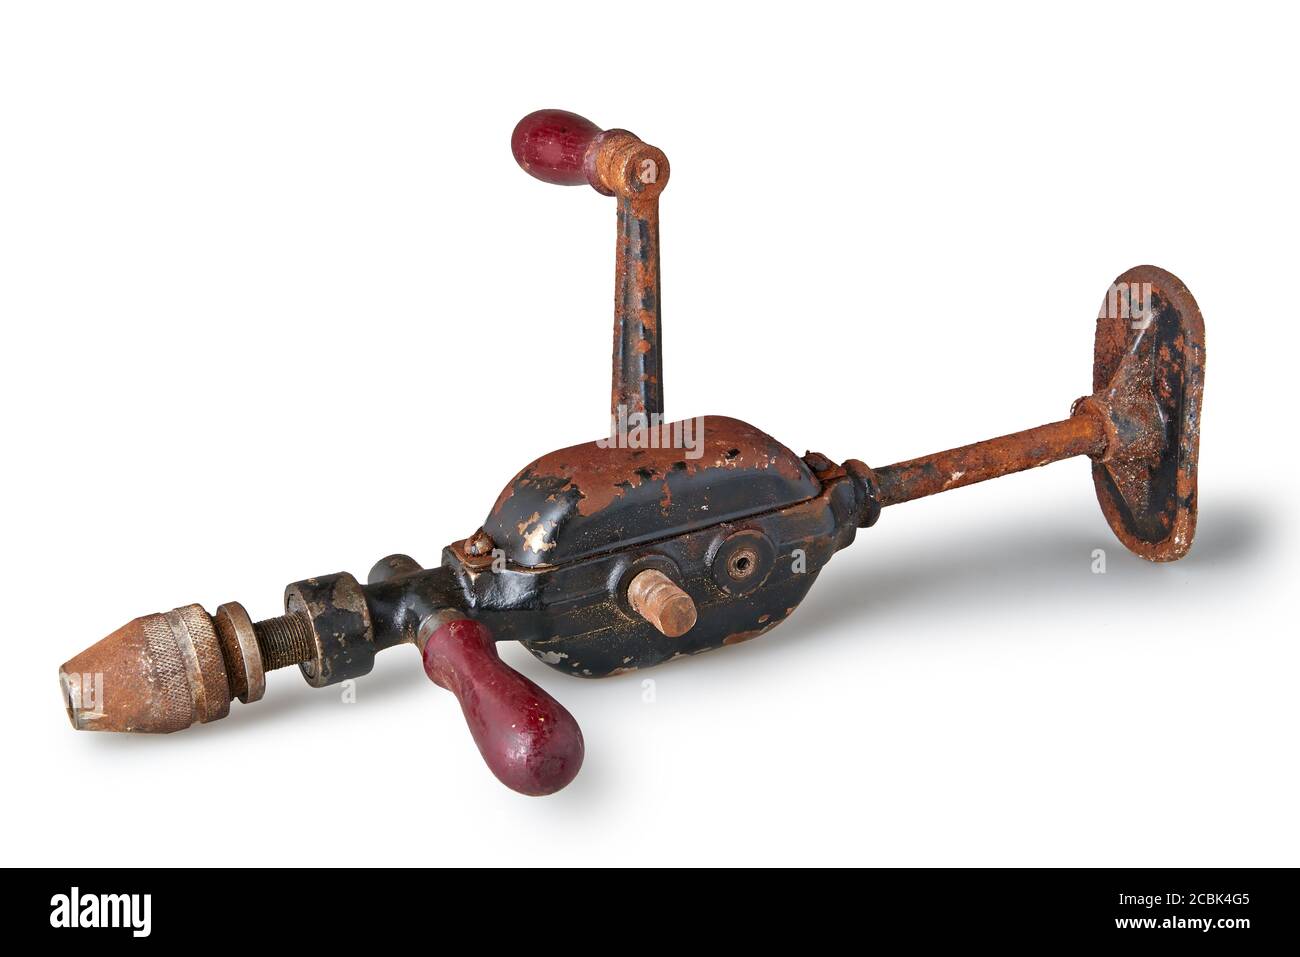 https://c8.alamy.com/comp/2CBK4G5/old-and-rusty-vintage-drill-hand-operated-isolated-on-white-2CBK4G5.jpg